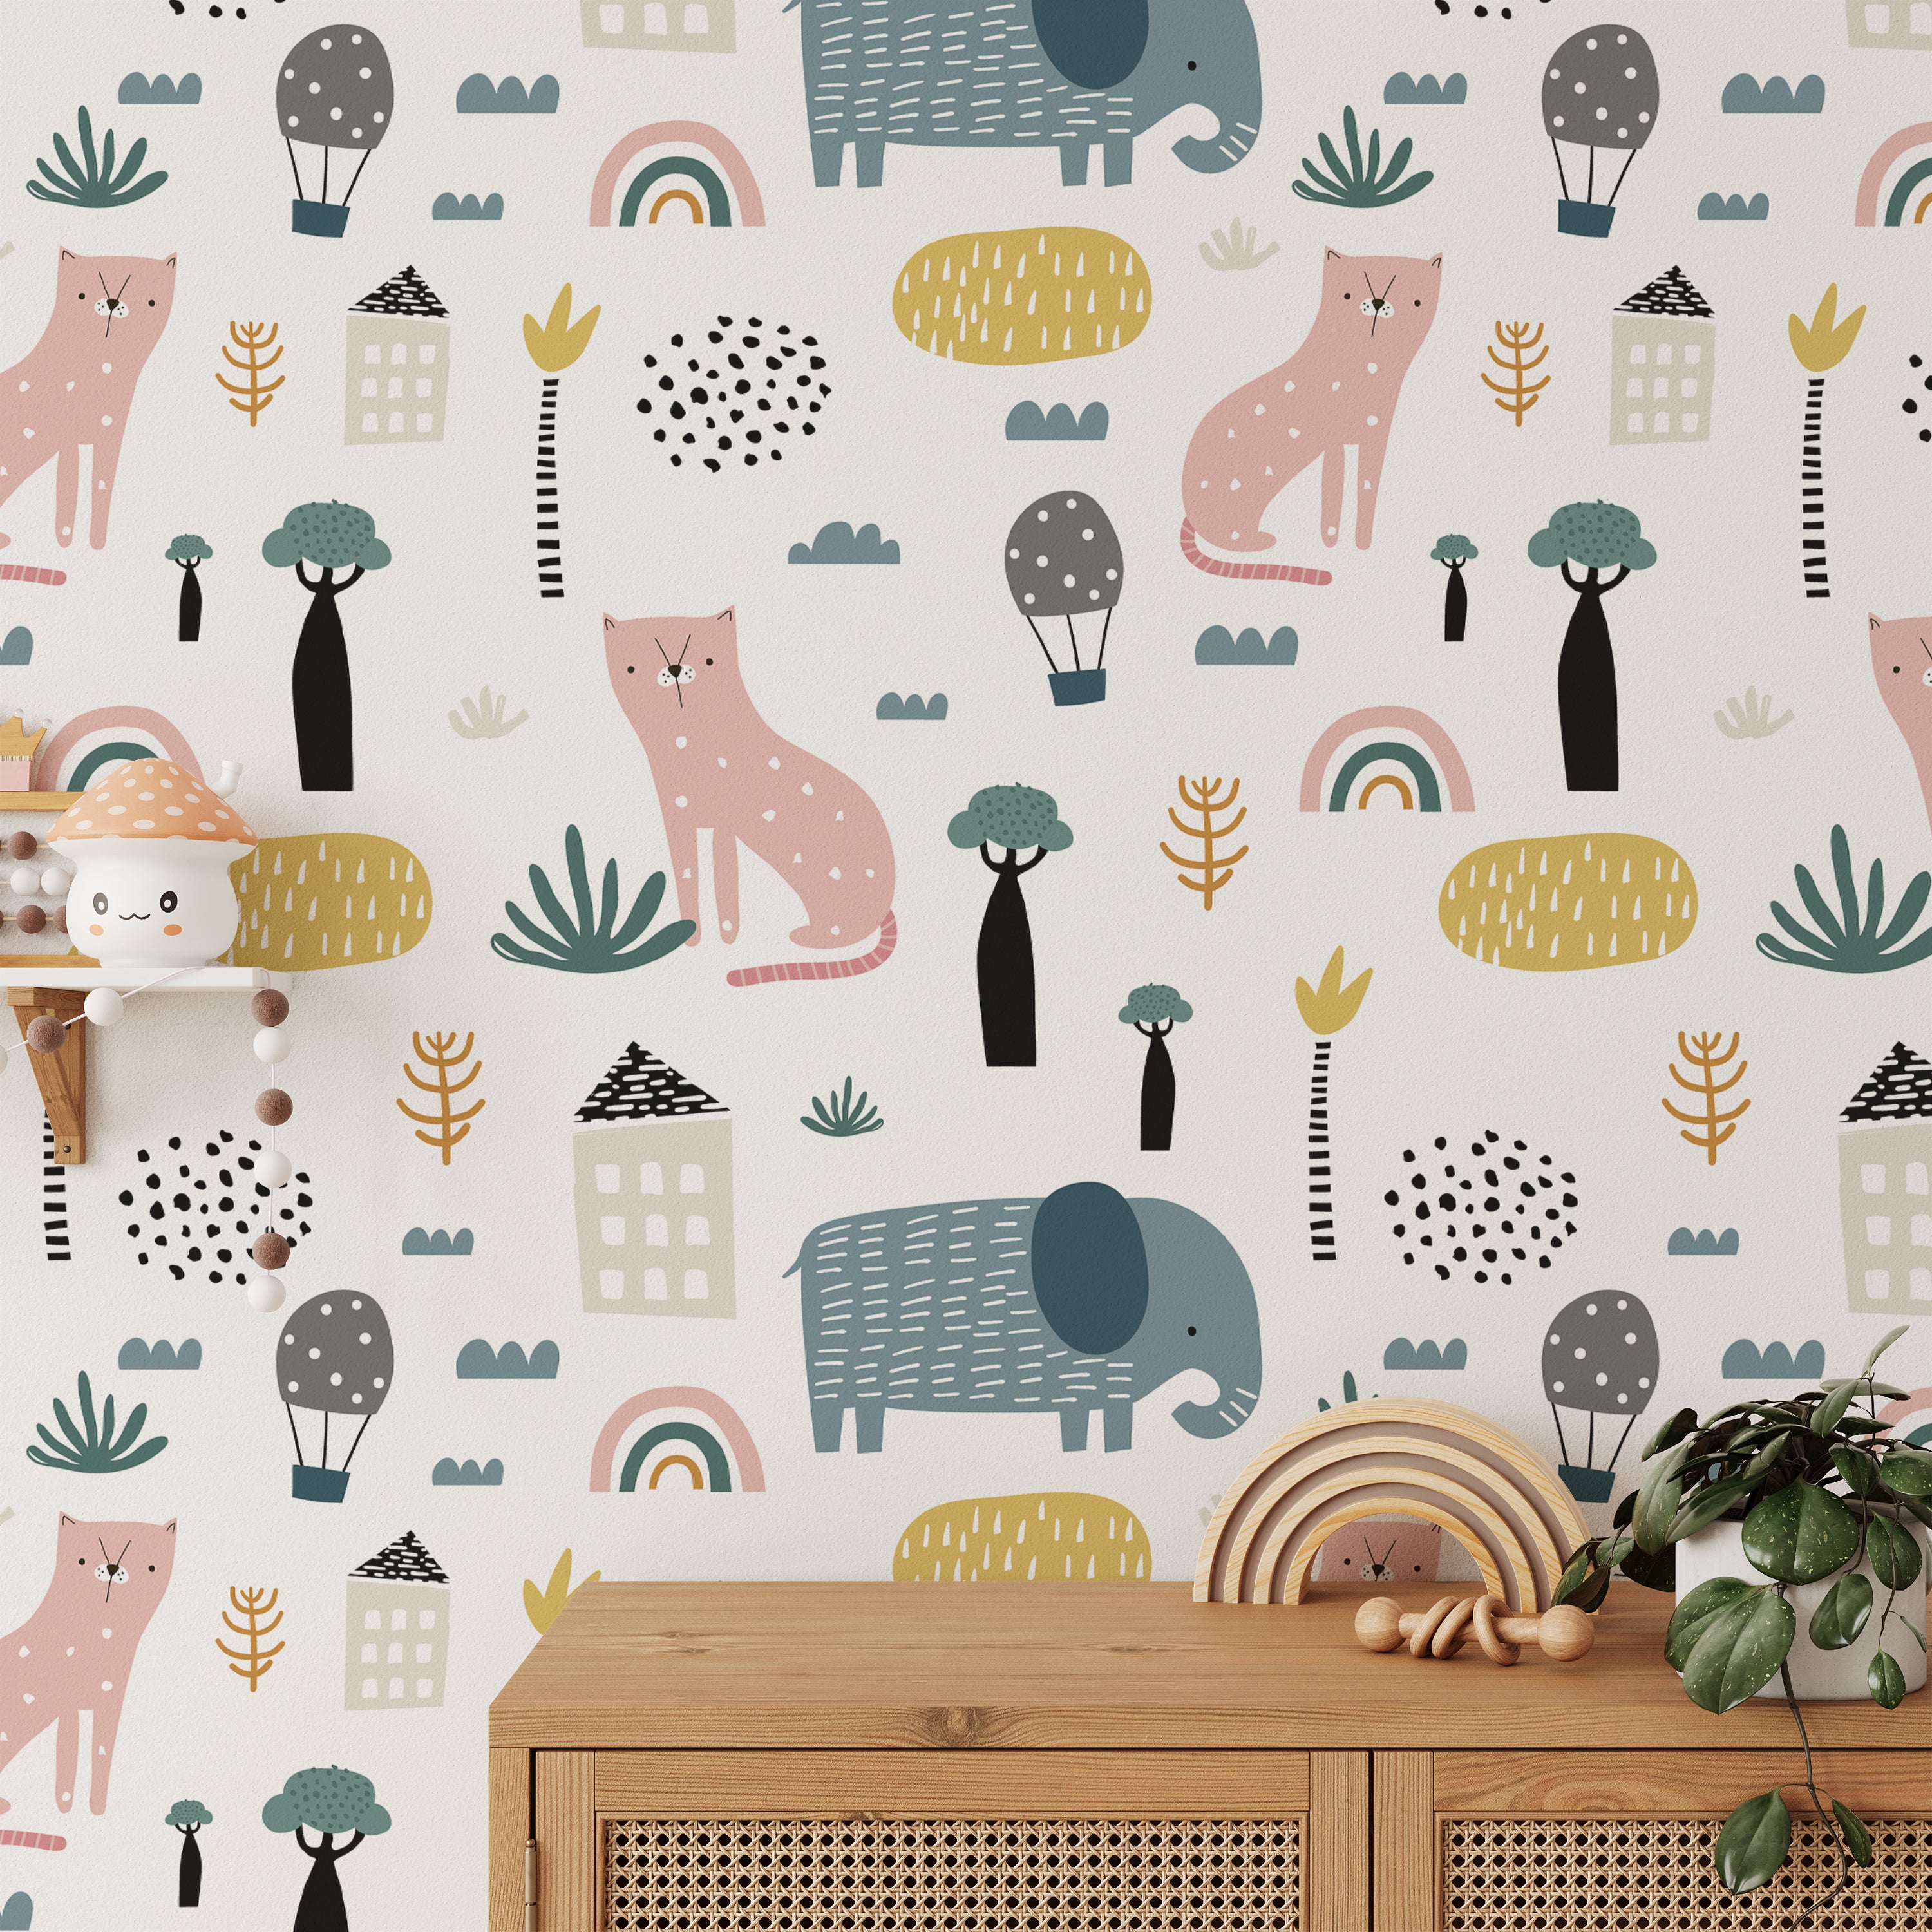 Close-up view of Fox and Elephant Wallpaper displaying a colorful and cheerful design with foxes, elephants, trees, and rainbows in soft pastels on a white background. The design is perfect for adding a fun and creative touch to a child's bedroom or play area.